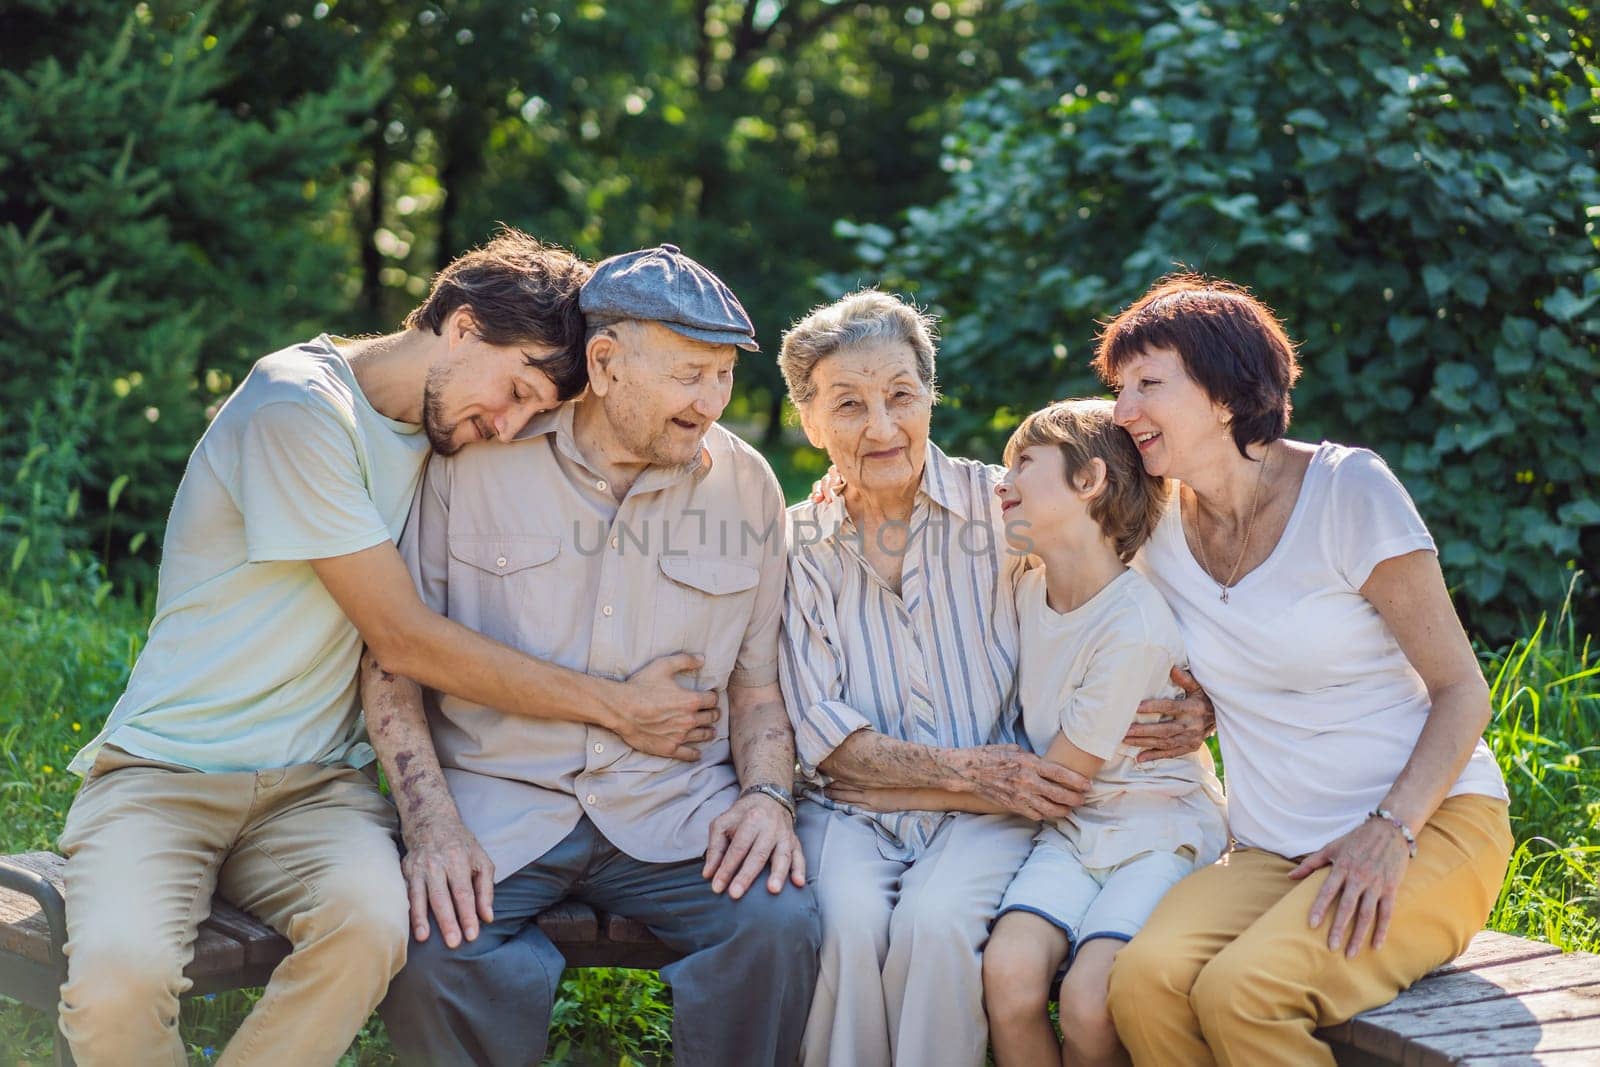 Four generations of family spend time together in the park. Elderly couple. Senior husband and wife holding hands and bonding with true emotions.